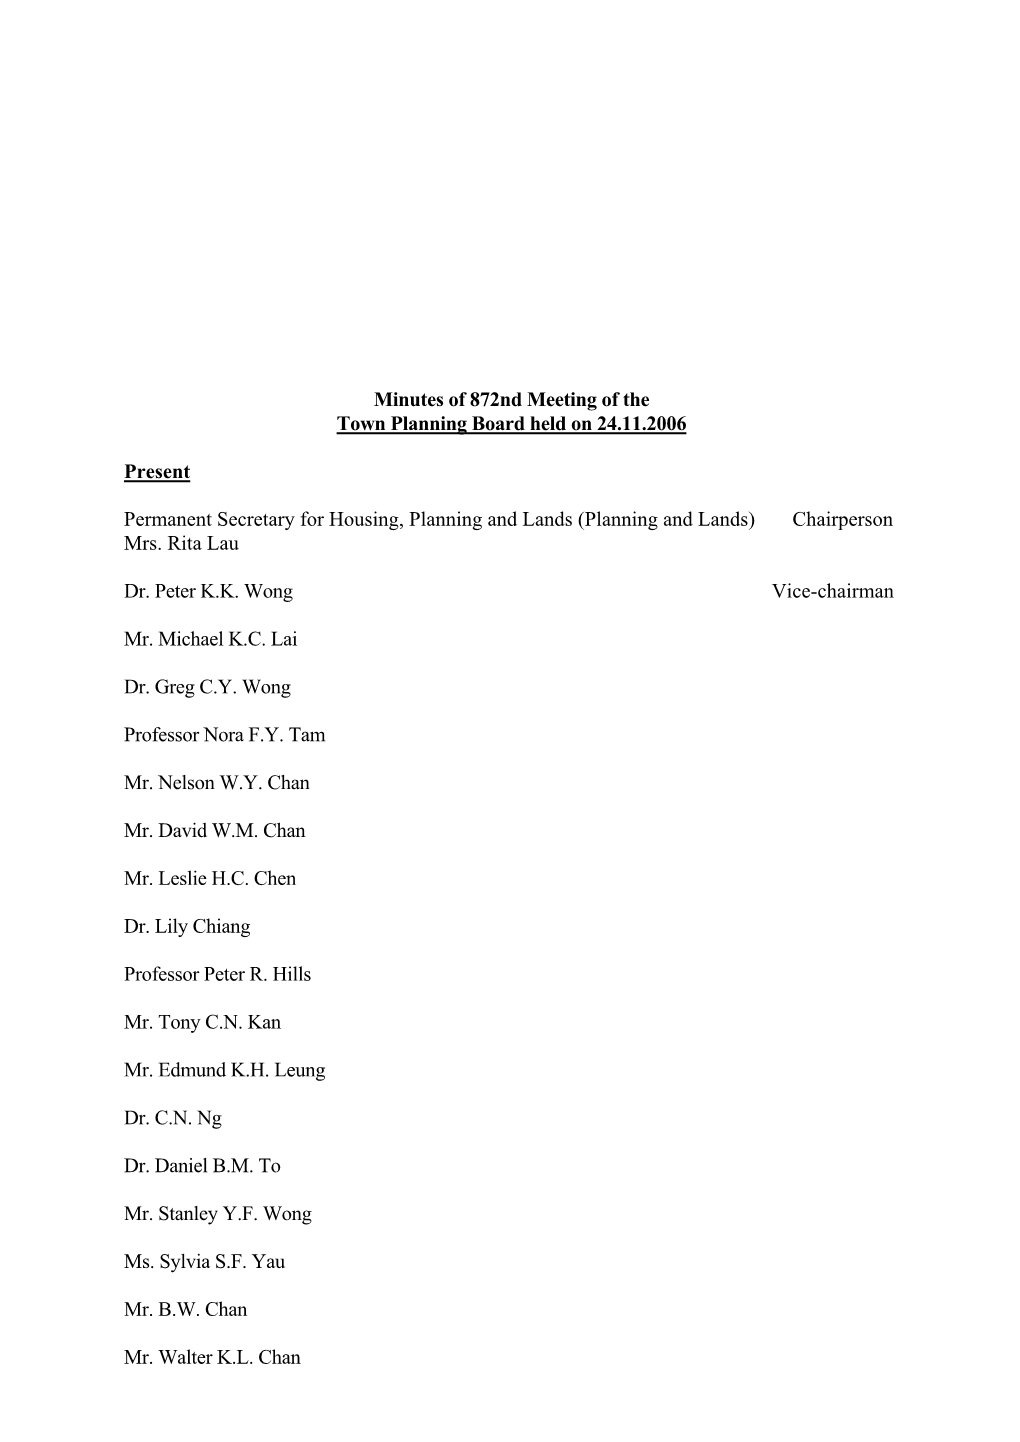 Minutes of 872Nd Meeting of the Town Planning Board Held on 24.11.2006